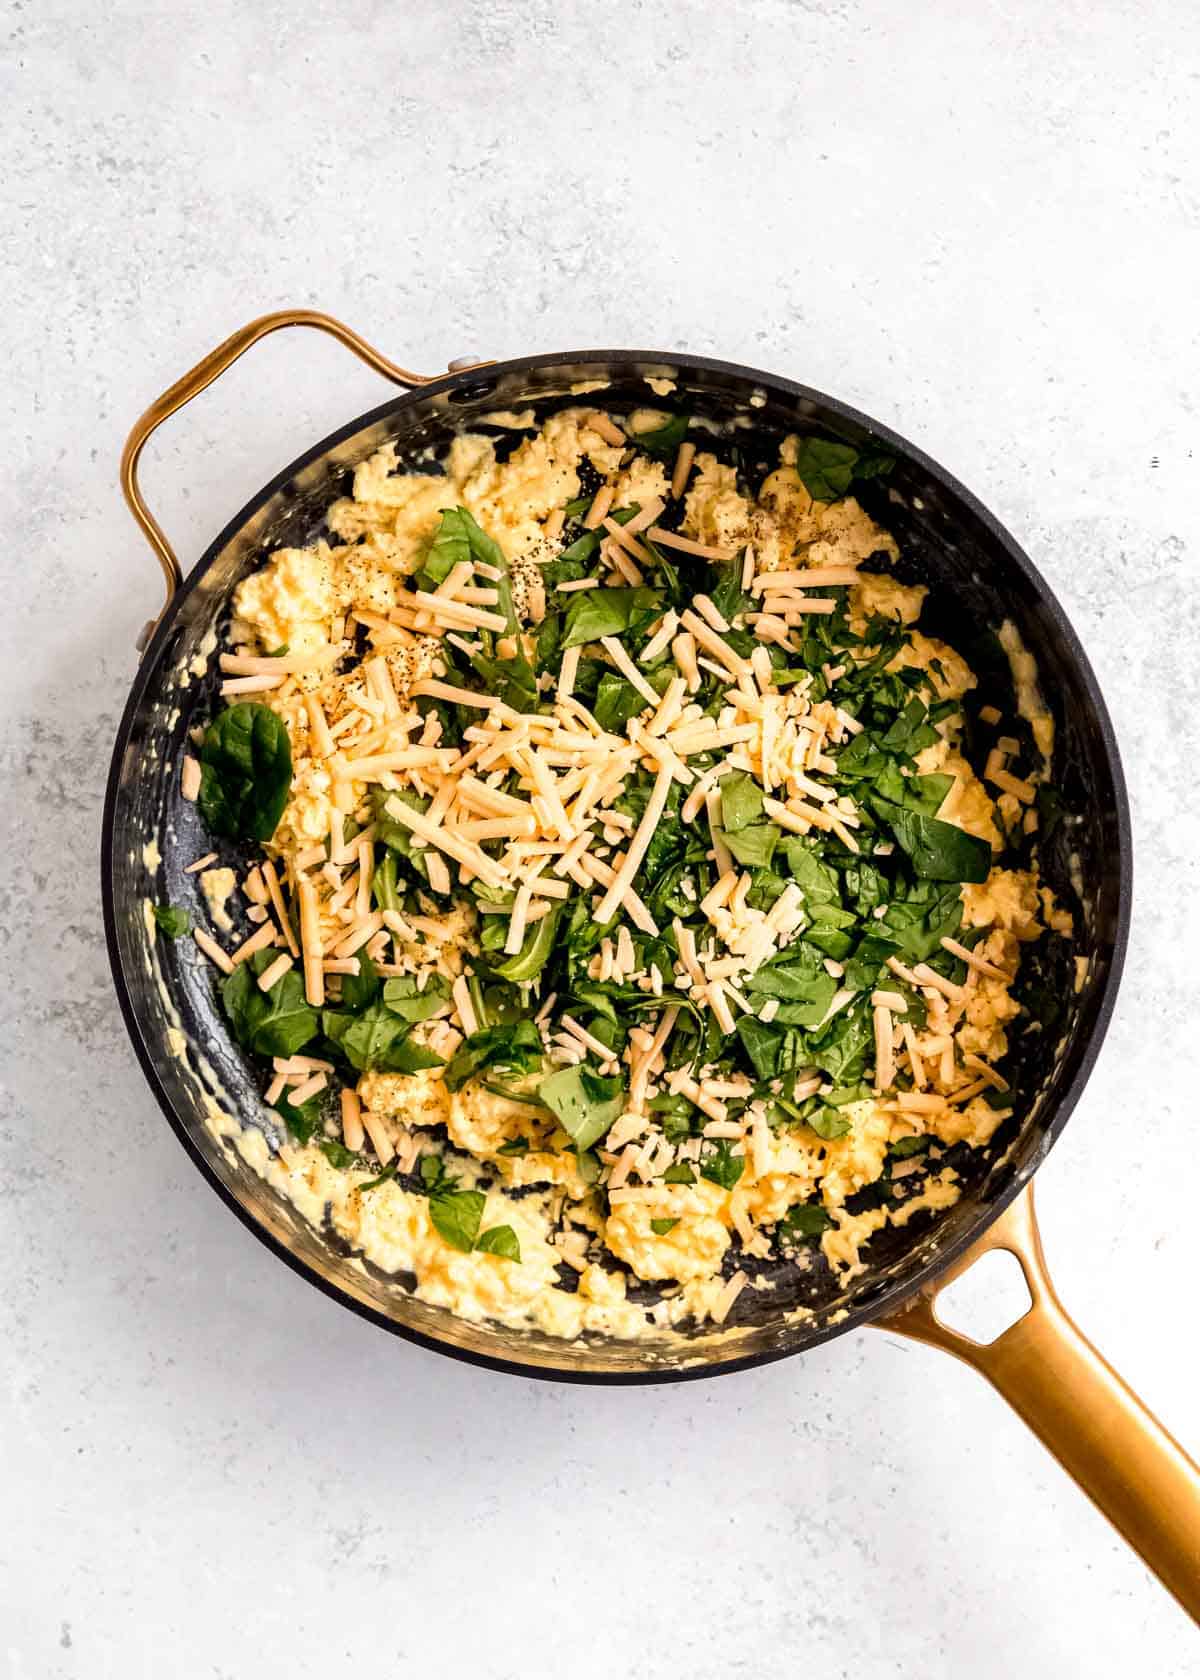 cheese, spinach, and seasonings being added to scrambled eggs